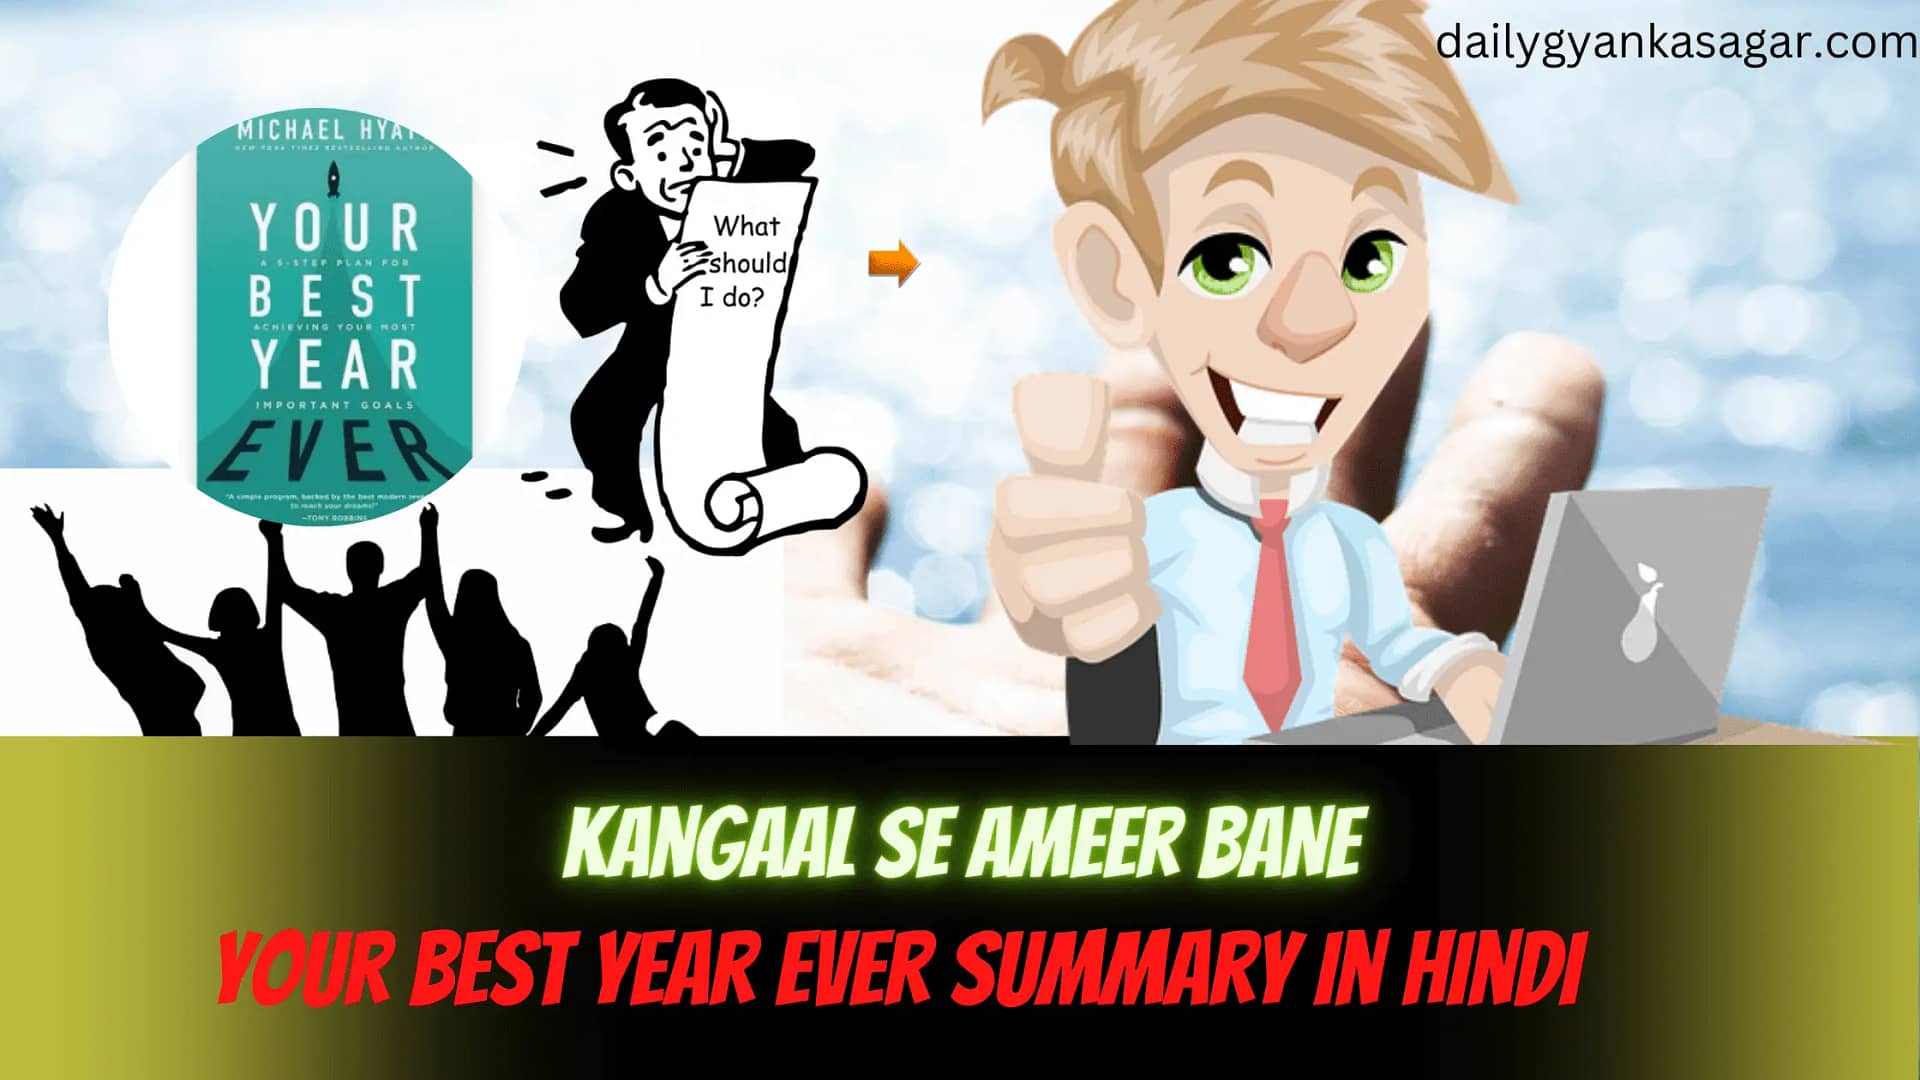 kangaal se ameer bANE " YOUR BEST YEAR EVER SUMMARY IN HINDI"